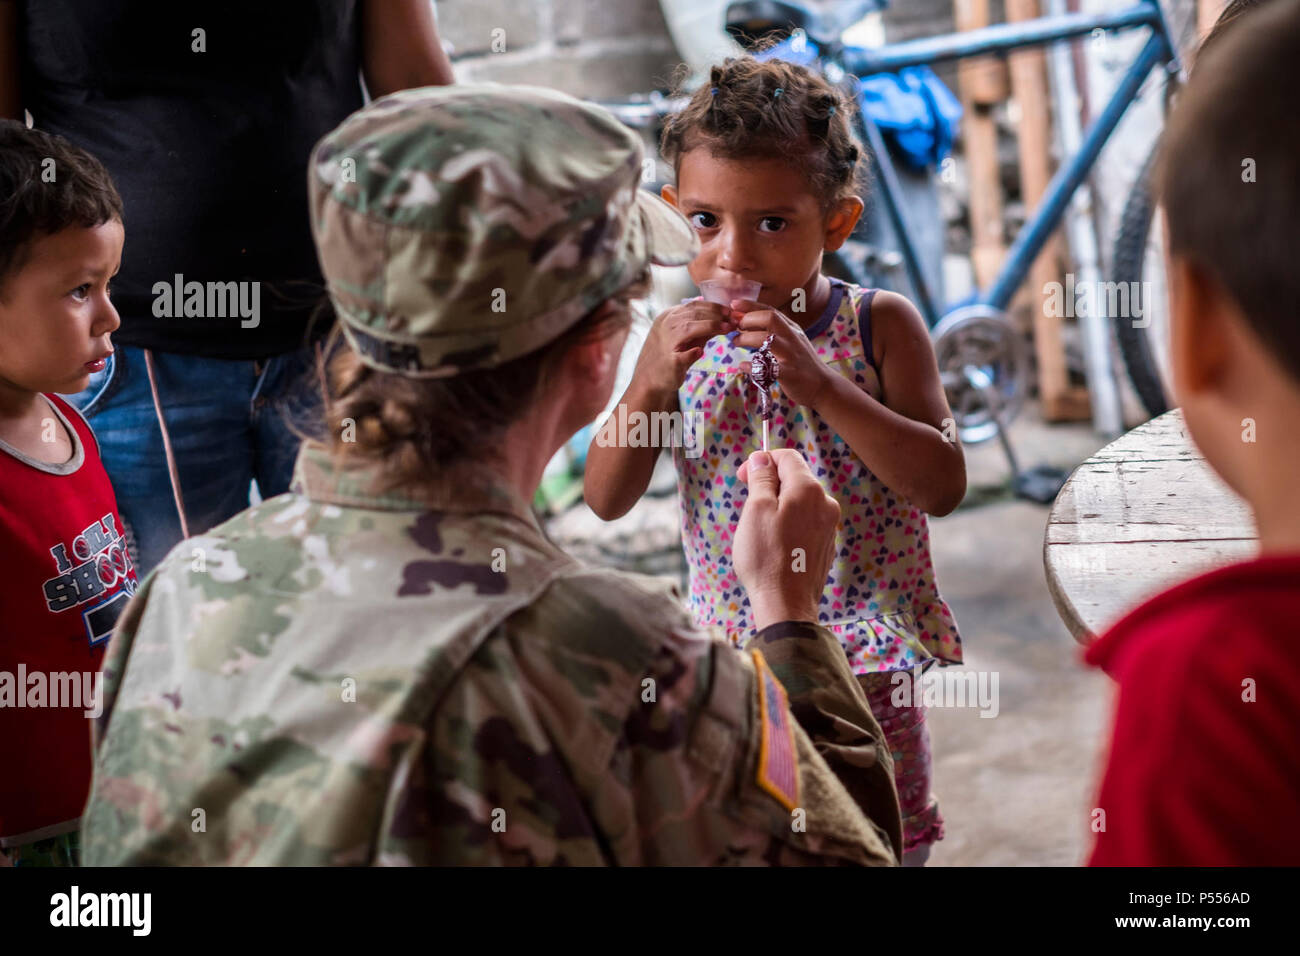 U.S. Army Lt. Col. Rhonda Dyer, Joint Task Force - Bravo, gives deworming medication to a local Honduran child while out on a Community Health Nurse mission in Comayagua, Honduras, May 10, 2017. The CHM is a weekly partnership with the staff at Jose Ochoa Public Health Clinic, administering vaccines, Vitamins, deworming medication and other medical supplies to over 180 Hondurans around the Comayagua area on May 10, 2017. Stock Photo